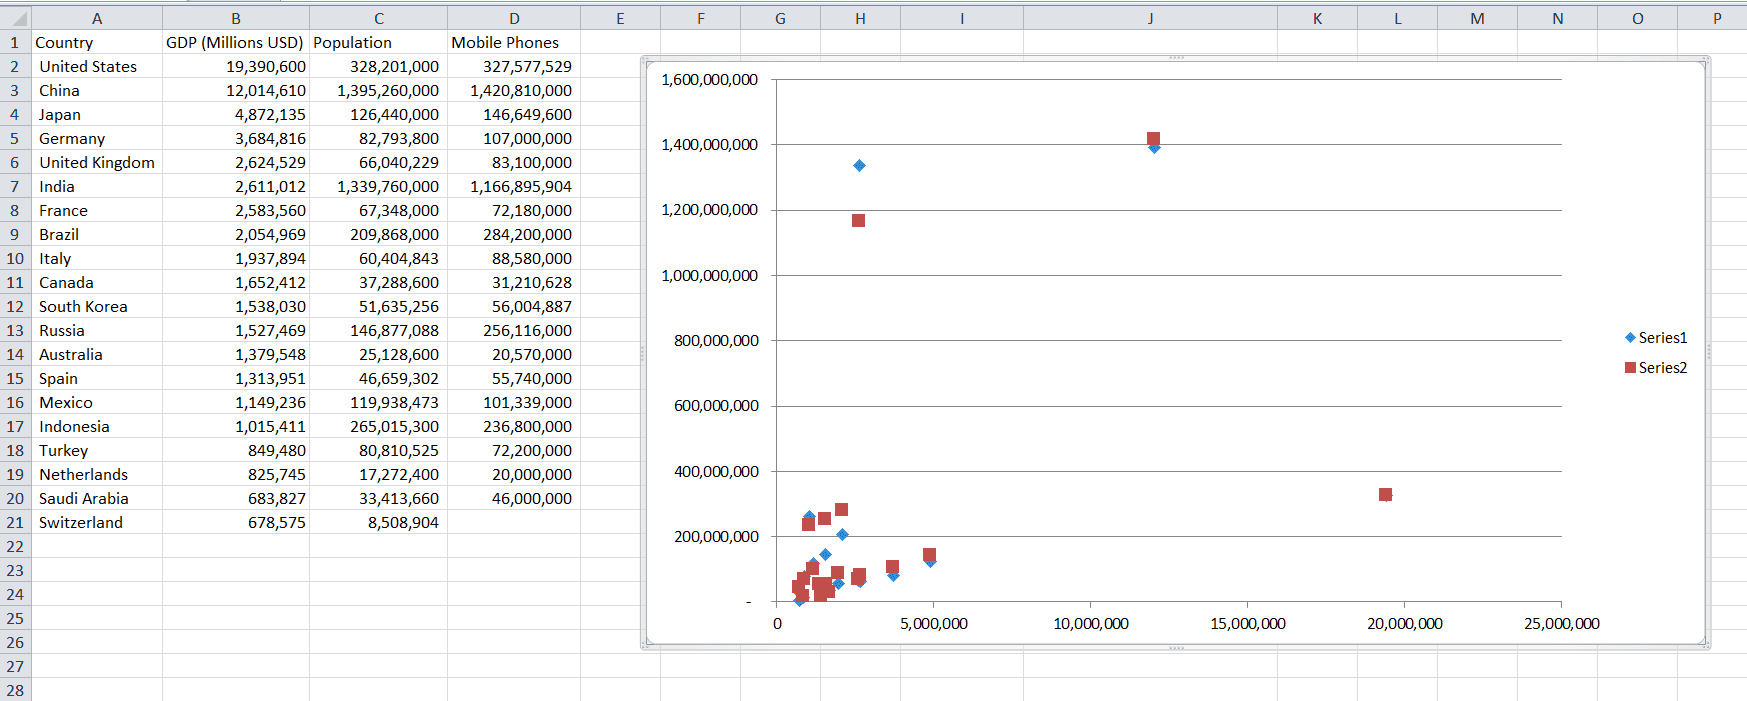 Scatter plot with GDP, population, and phone data